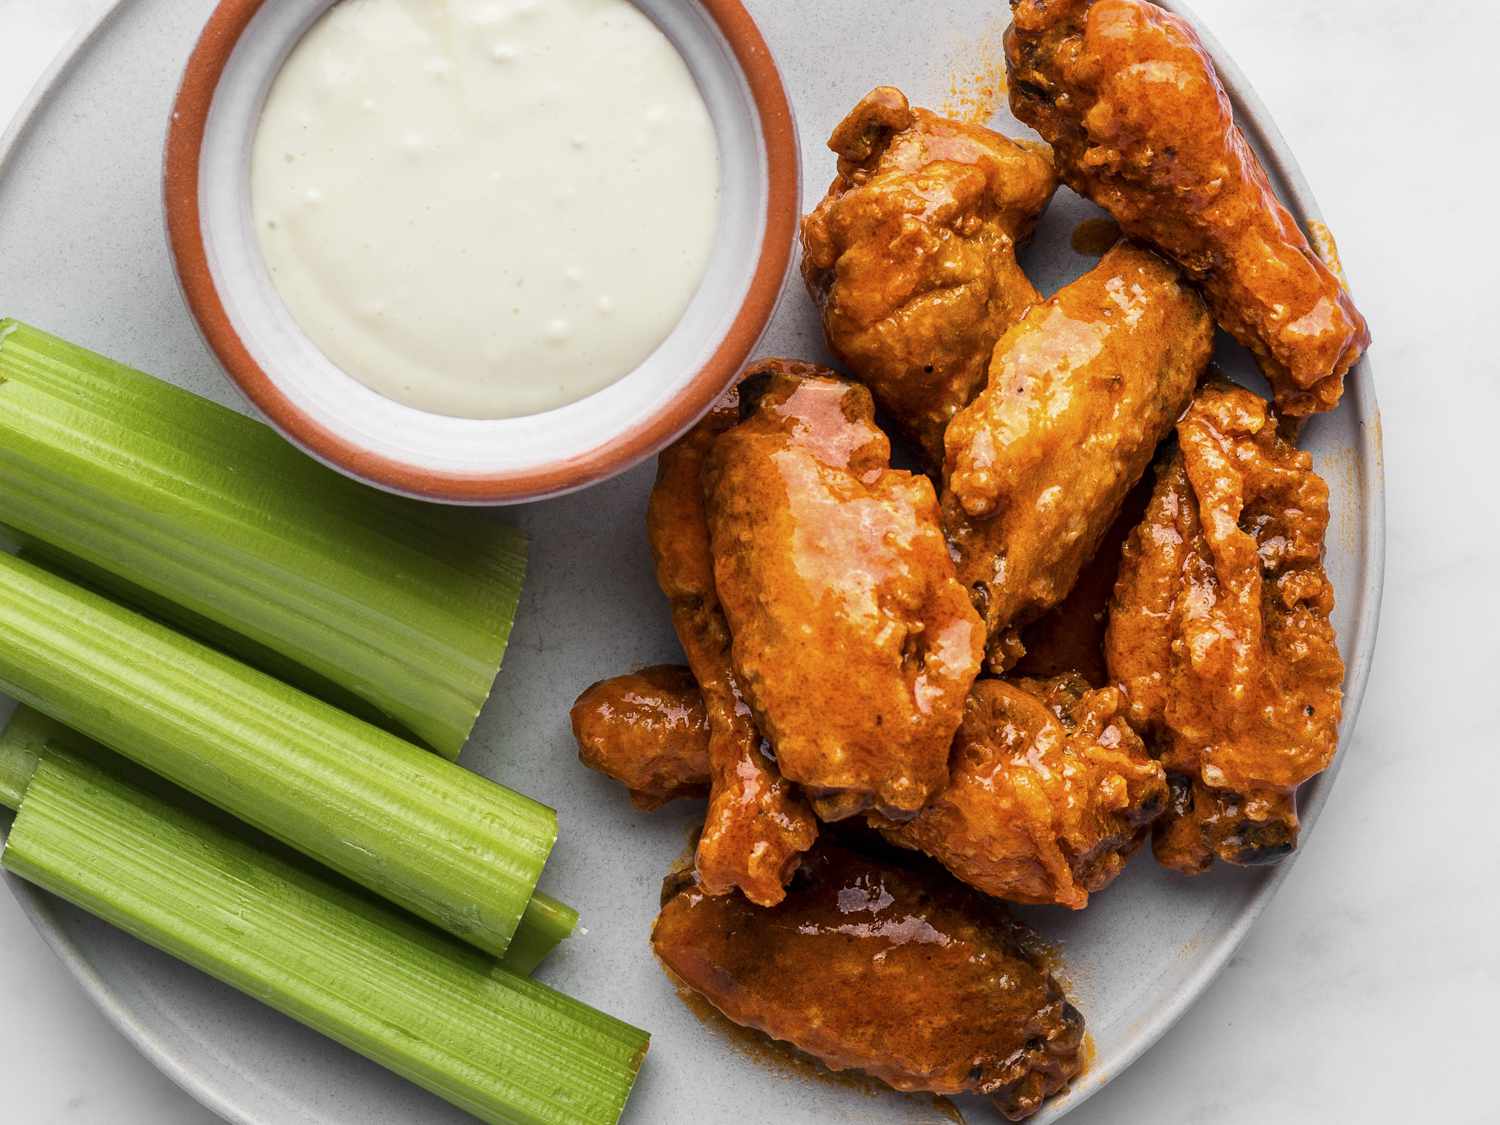 Crispy, sauce-covered fried buffalo wings on a white ceramic plate with sliced celery sticks and a small bowl of bleu cheese dressing, on a white stone background.